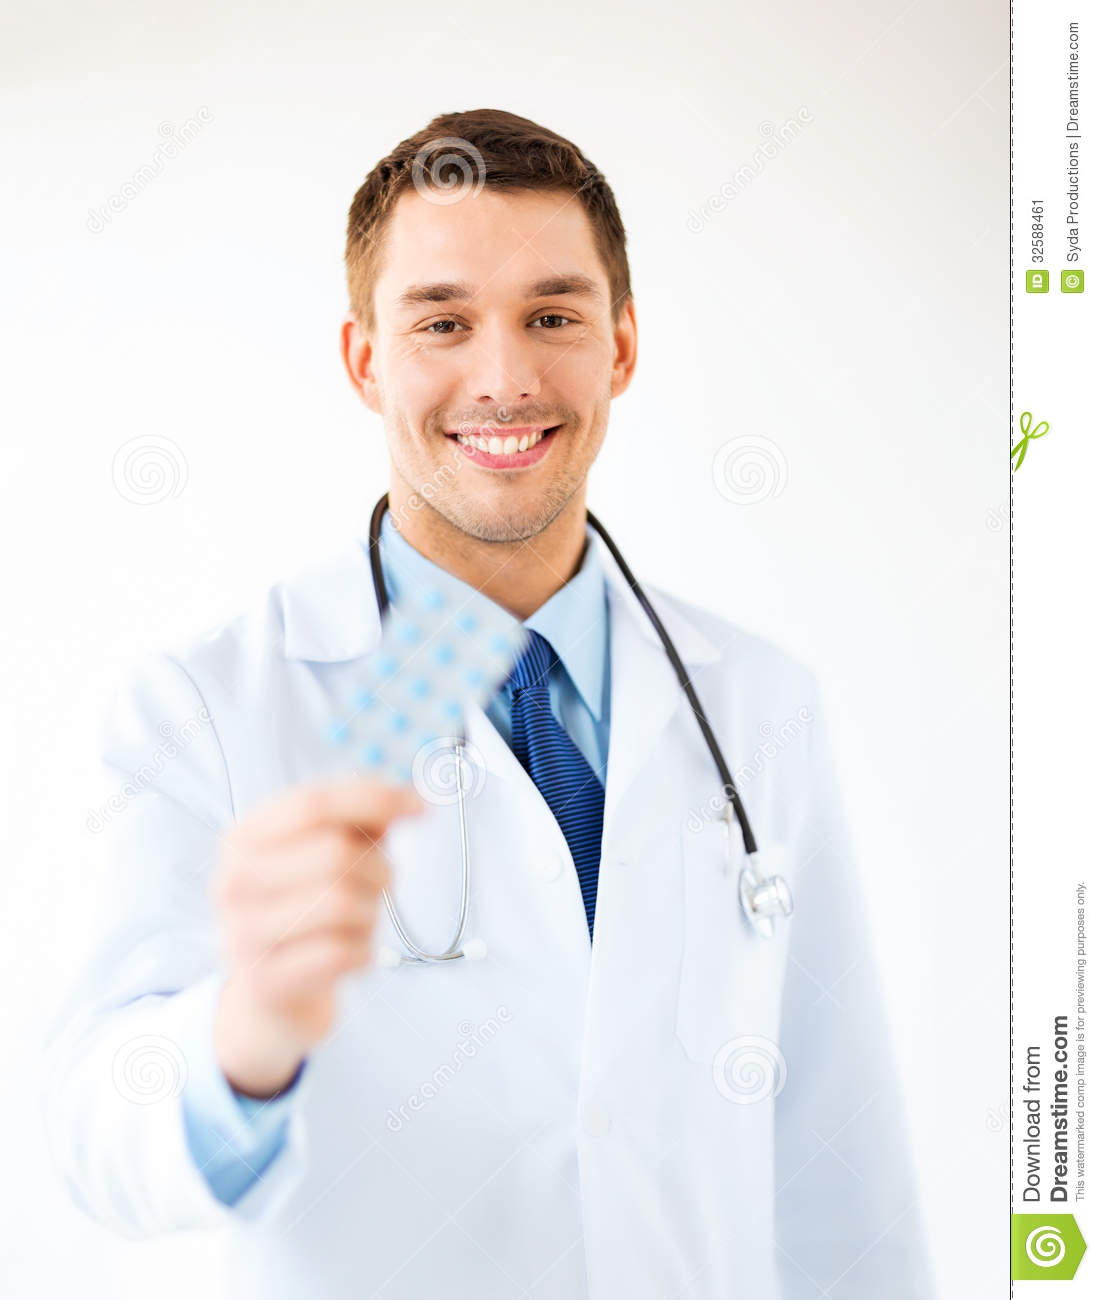 Young Male Doctor With Pack Of Pills Stock Image   Image  32588461